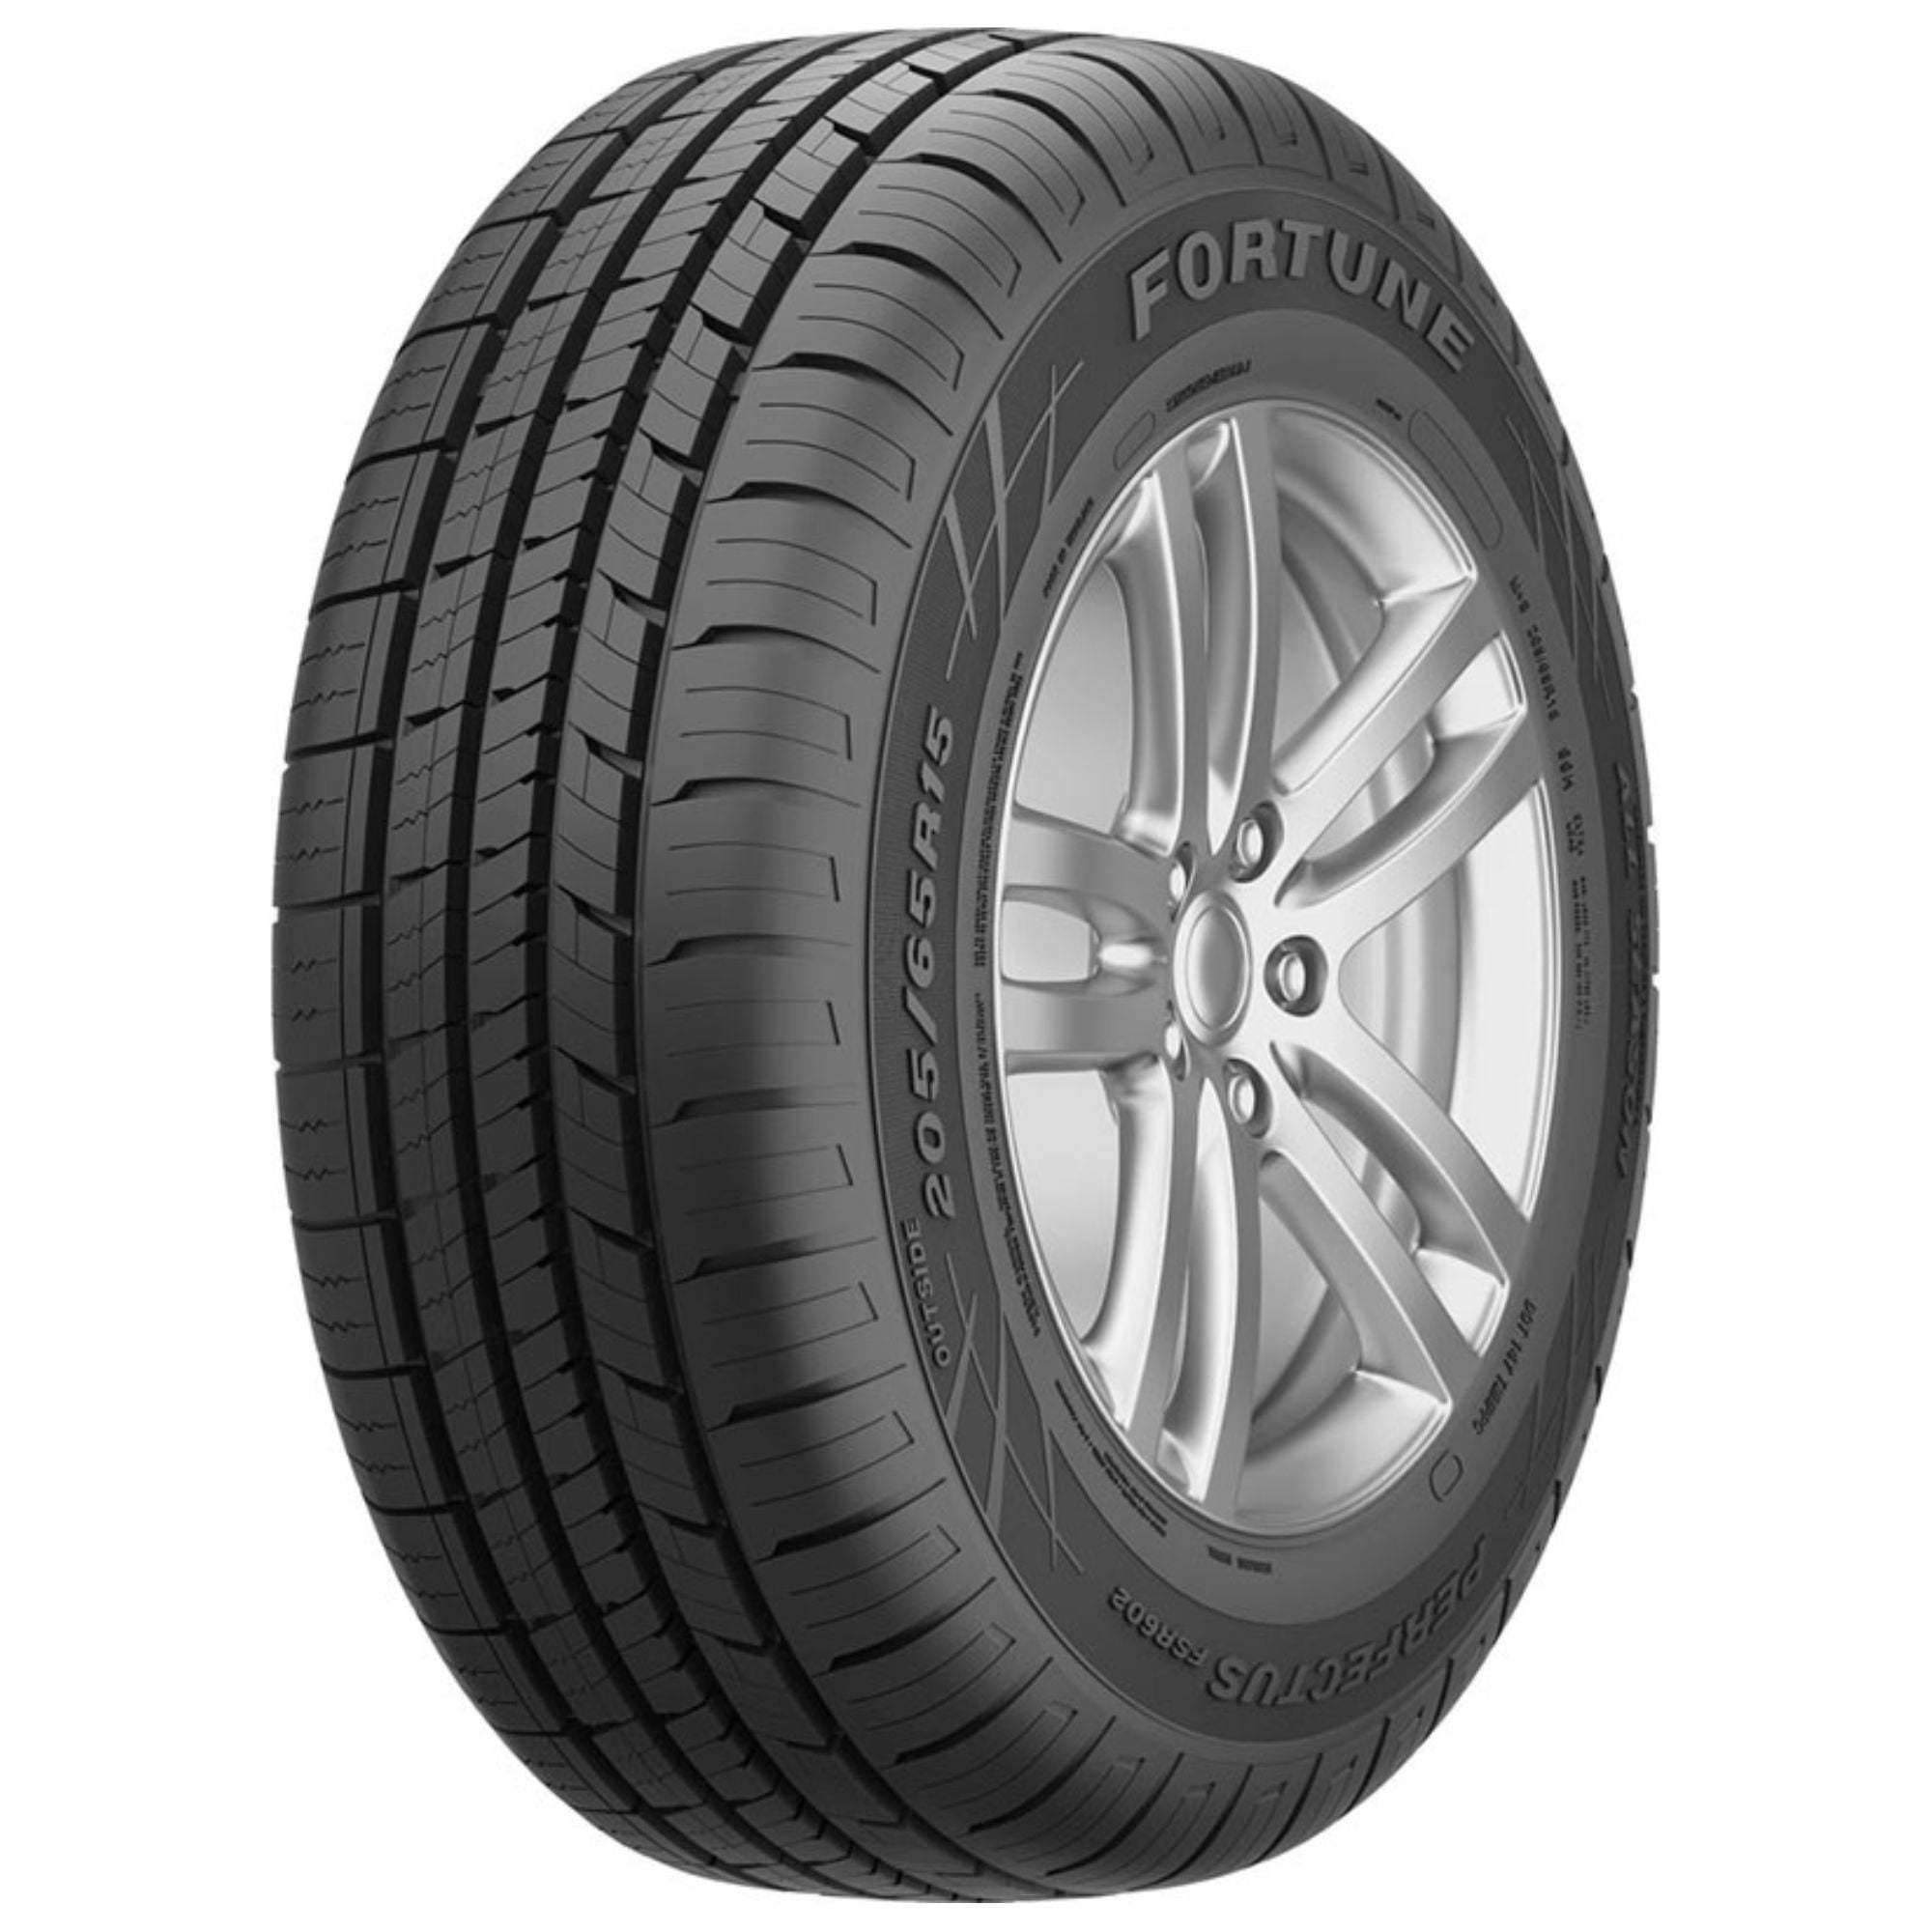 Continental TrueContact Tour 175/65R15 84H Tire Season All BSW